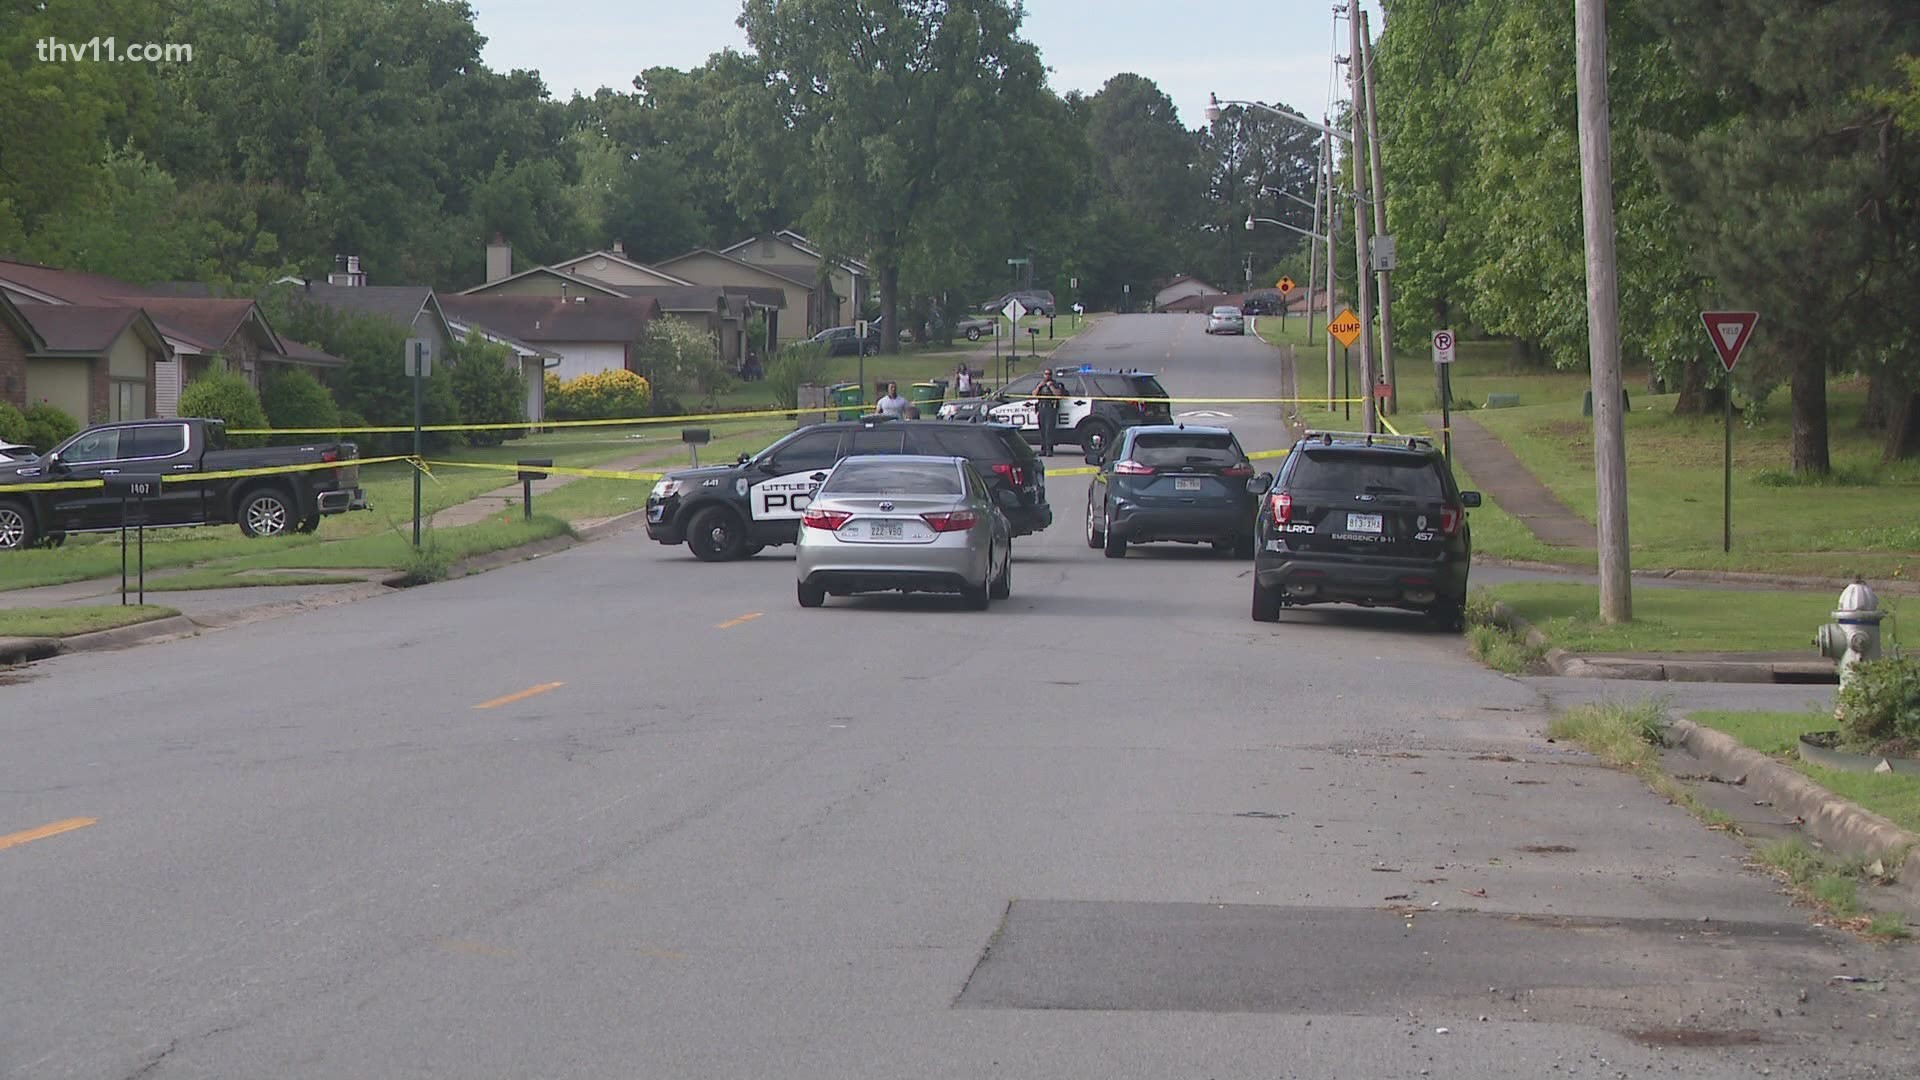 A pair of investigations are underway after a man was shot by a Little Rock police officer, who was being dragged down the road.